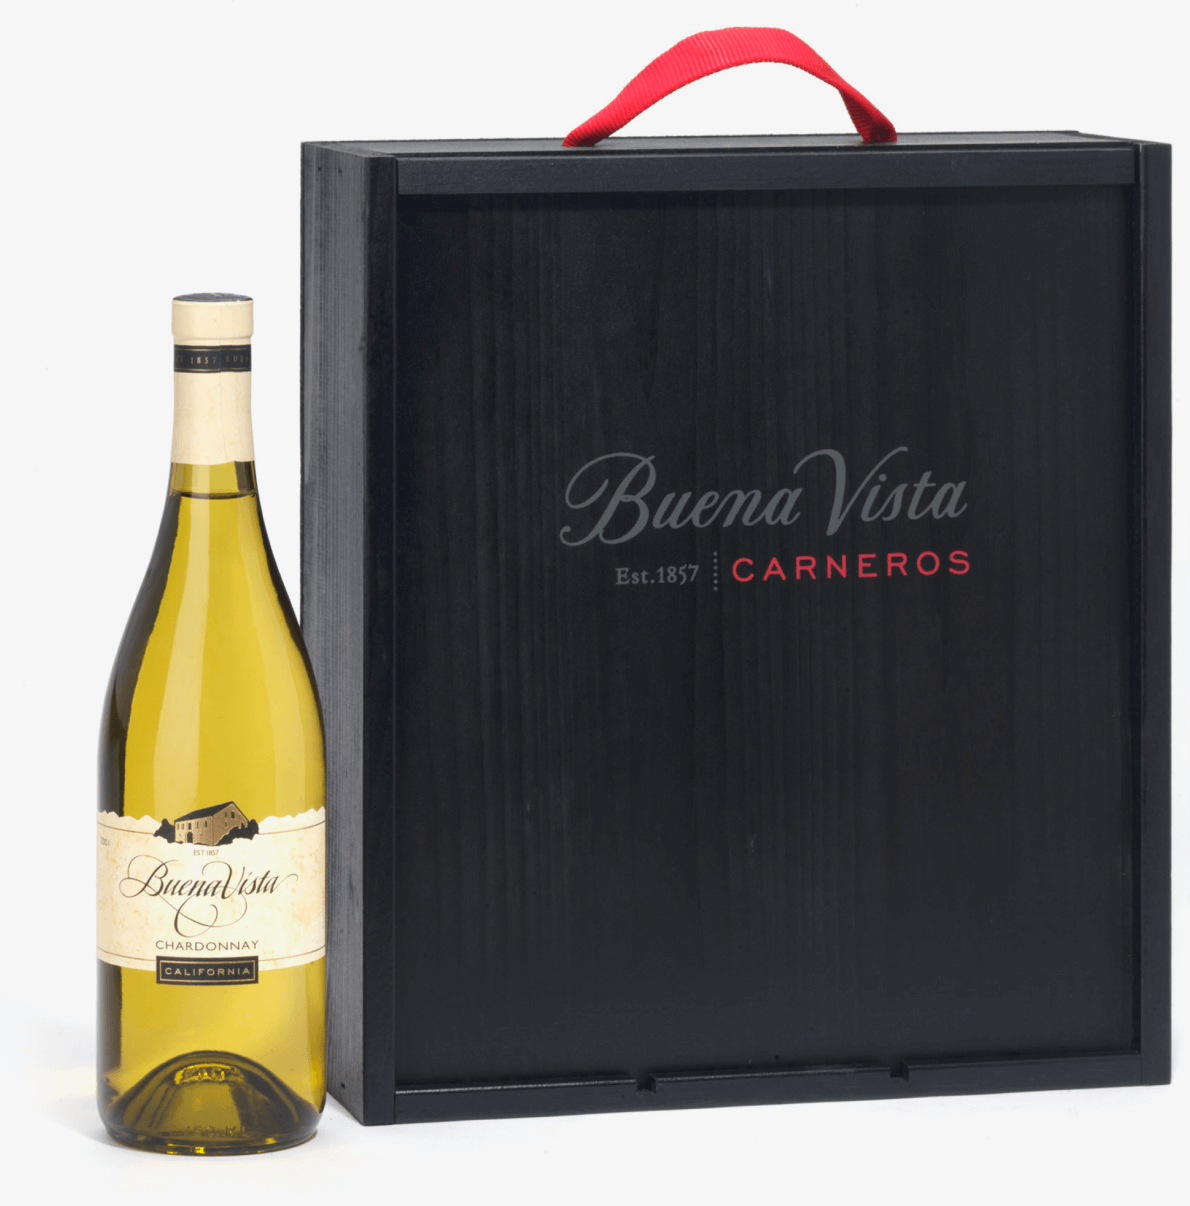 A bottle of white wine in a gift box.